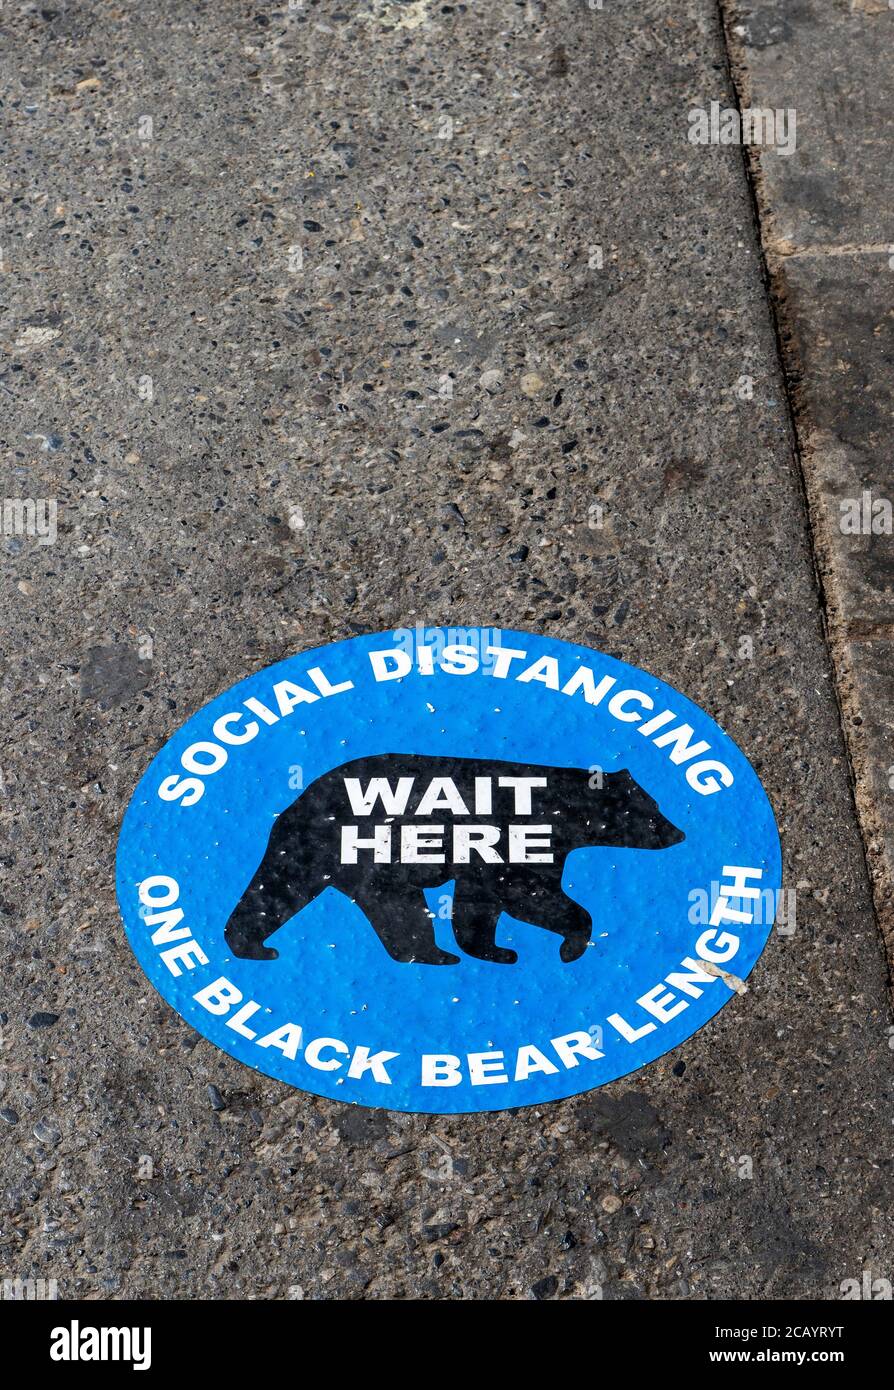 BANFF, CANADA - JULY 29, 2020: Social Distancing road pavement sticker to help visitors at popular Banff National Park to keep a safe distance when sh Stock Photo